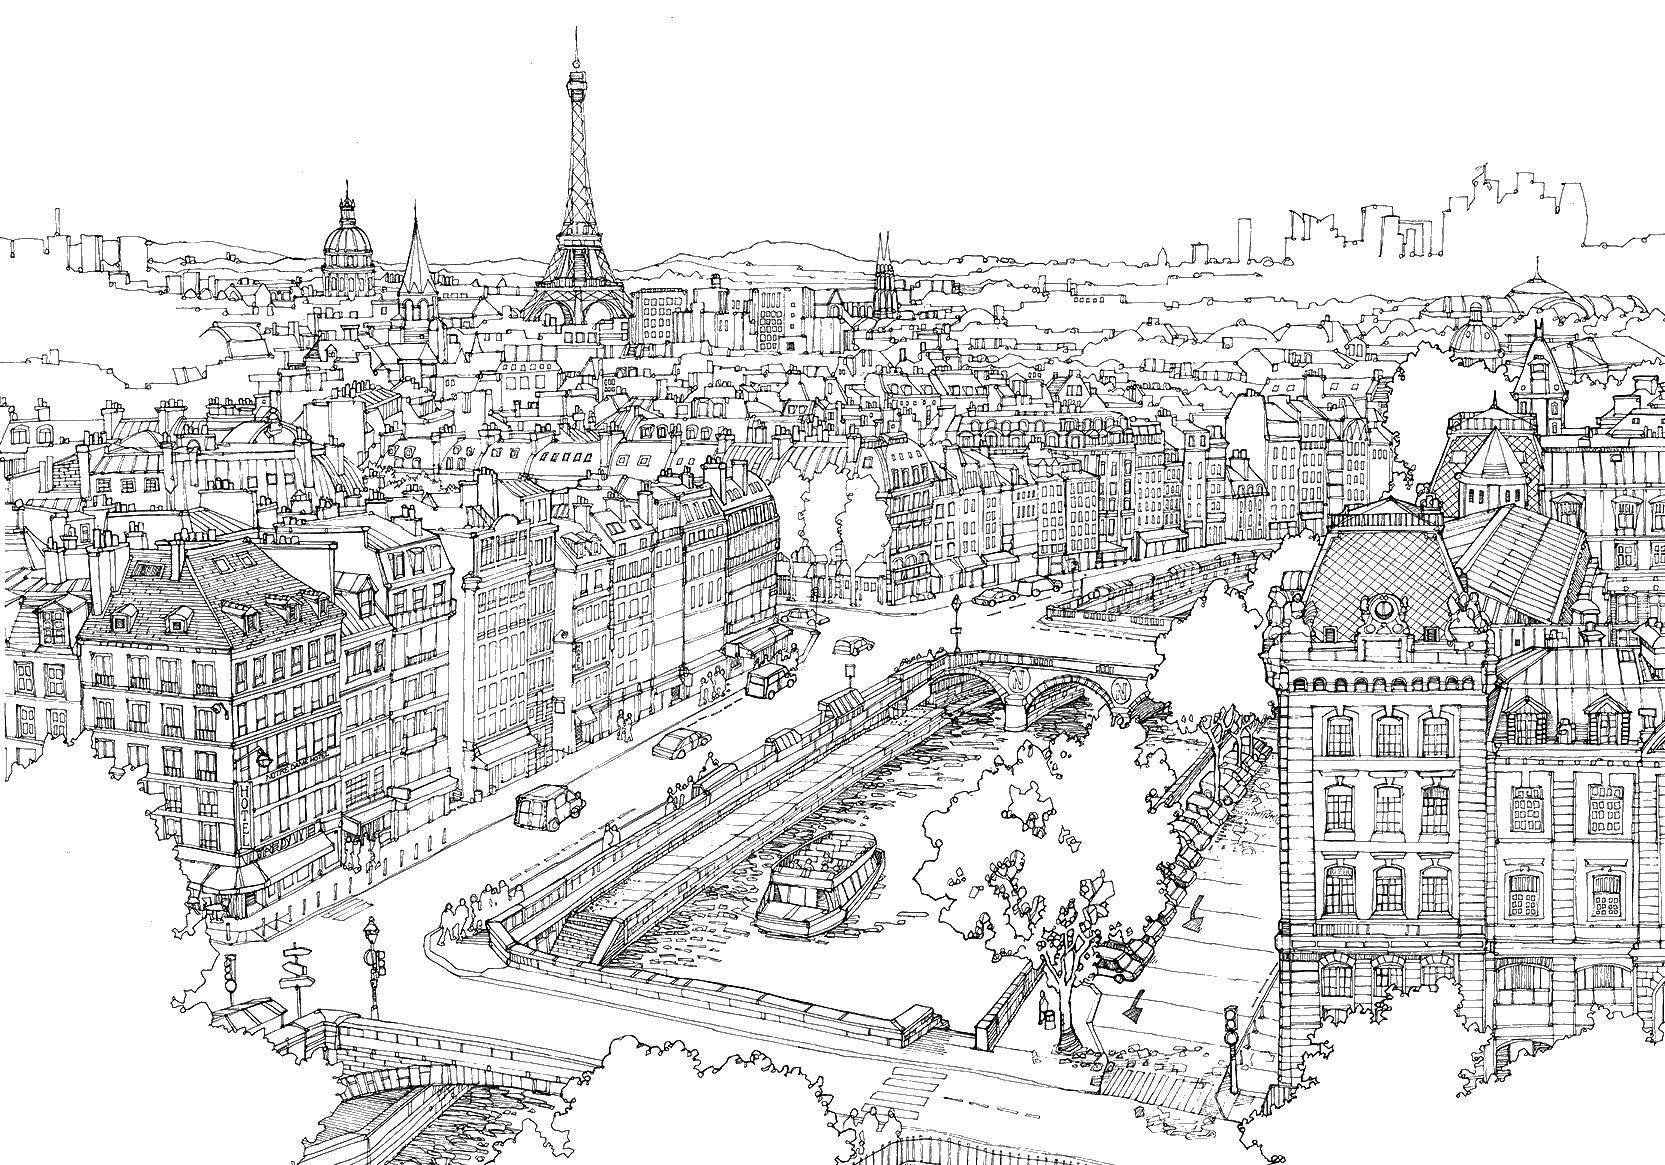 Coloring Paris. Category The city. Tags:  the city, the house, the Eiffel tower.